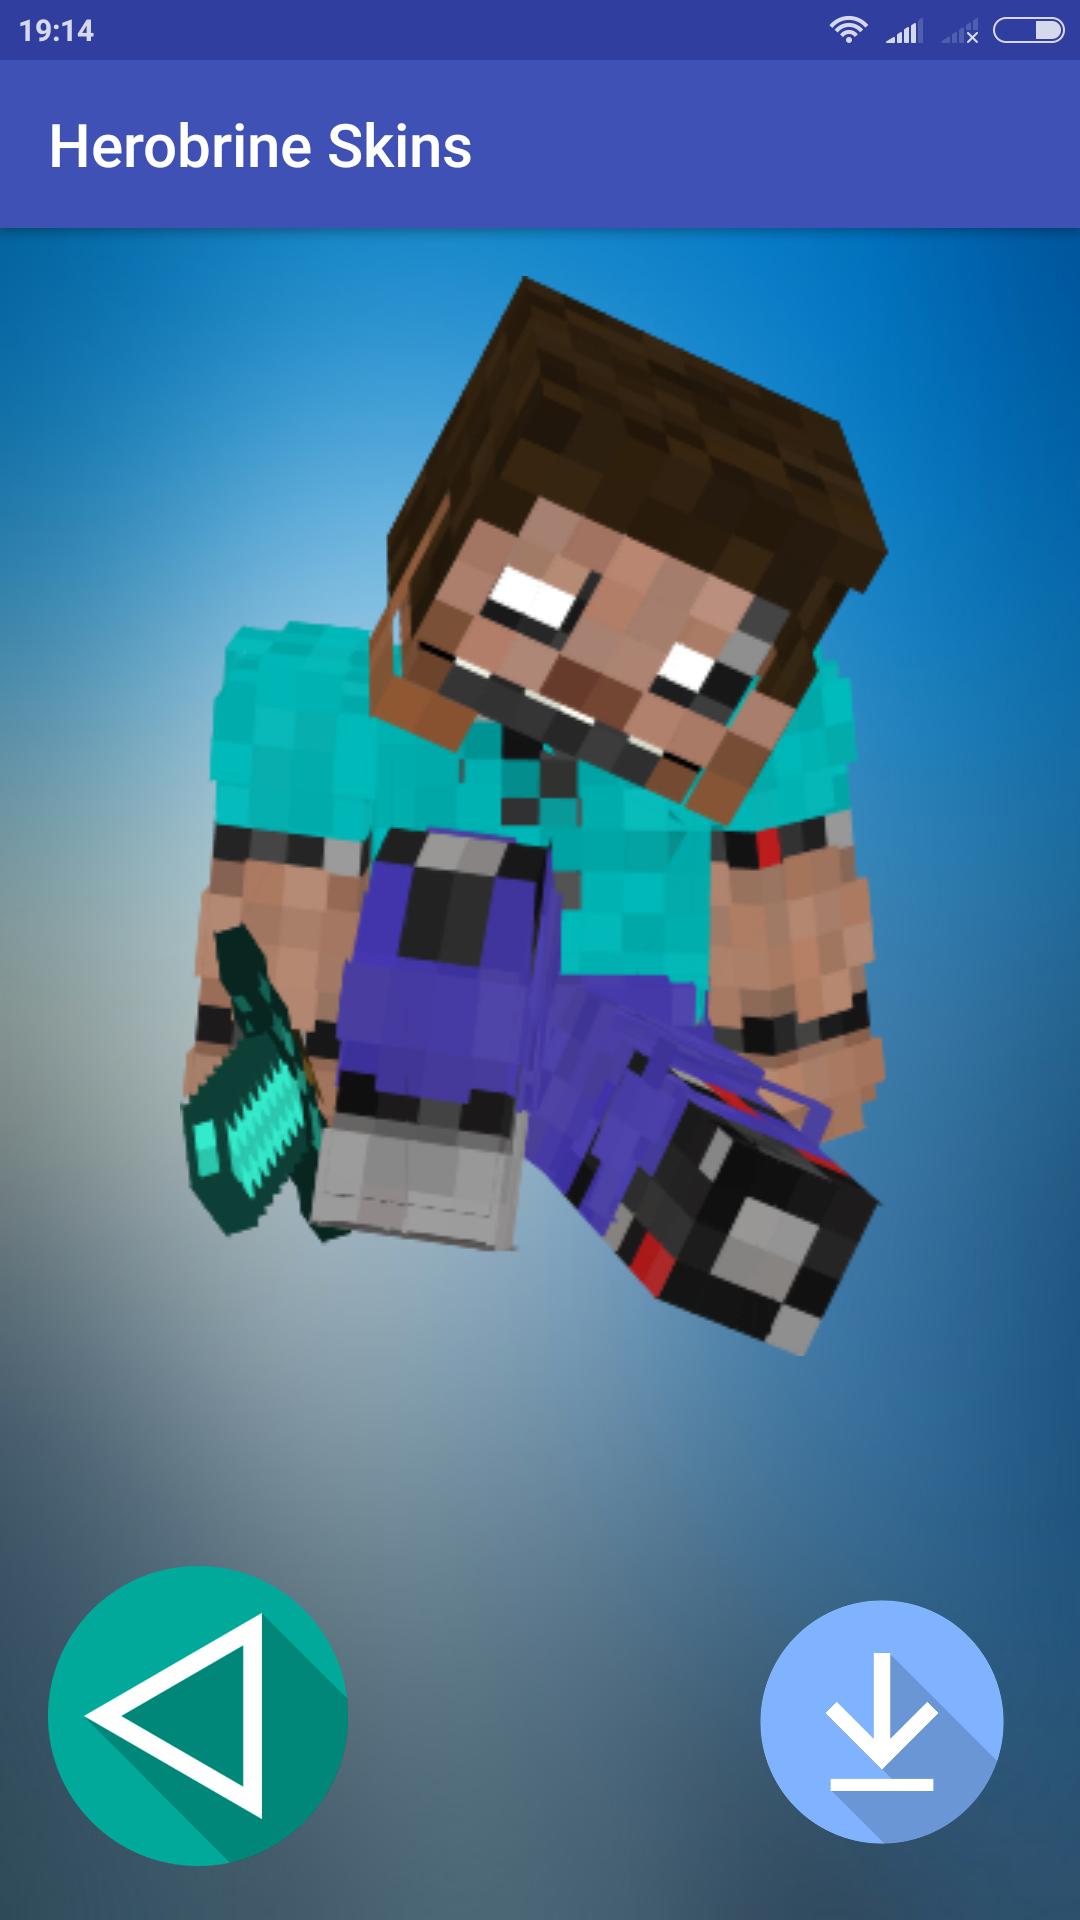 Android 用の Herobrine Skin For Minecraft Mcpe New Character Apk をダウンロード